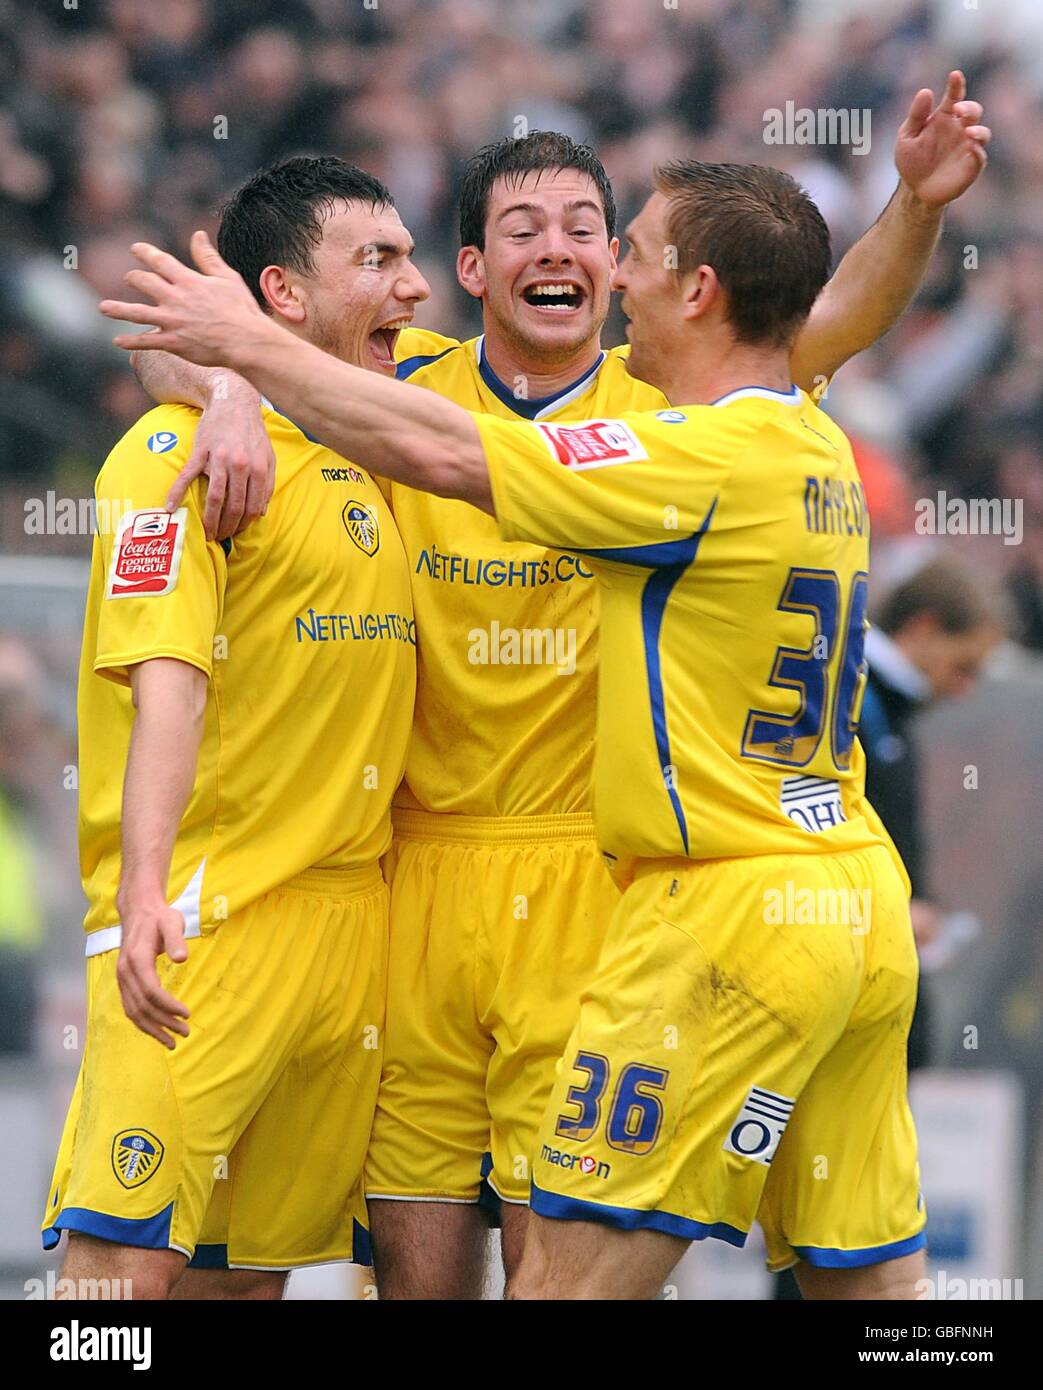 Leeds United's Robert Snodgrass (left) celebrates scoring his sides second goal with teammates Ben Parker (centre) and Richard Naylor (right) Stock Photo